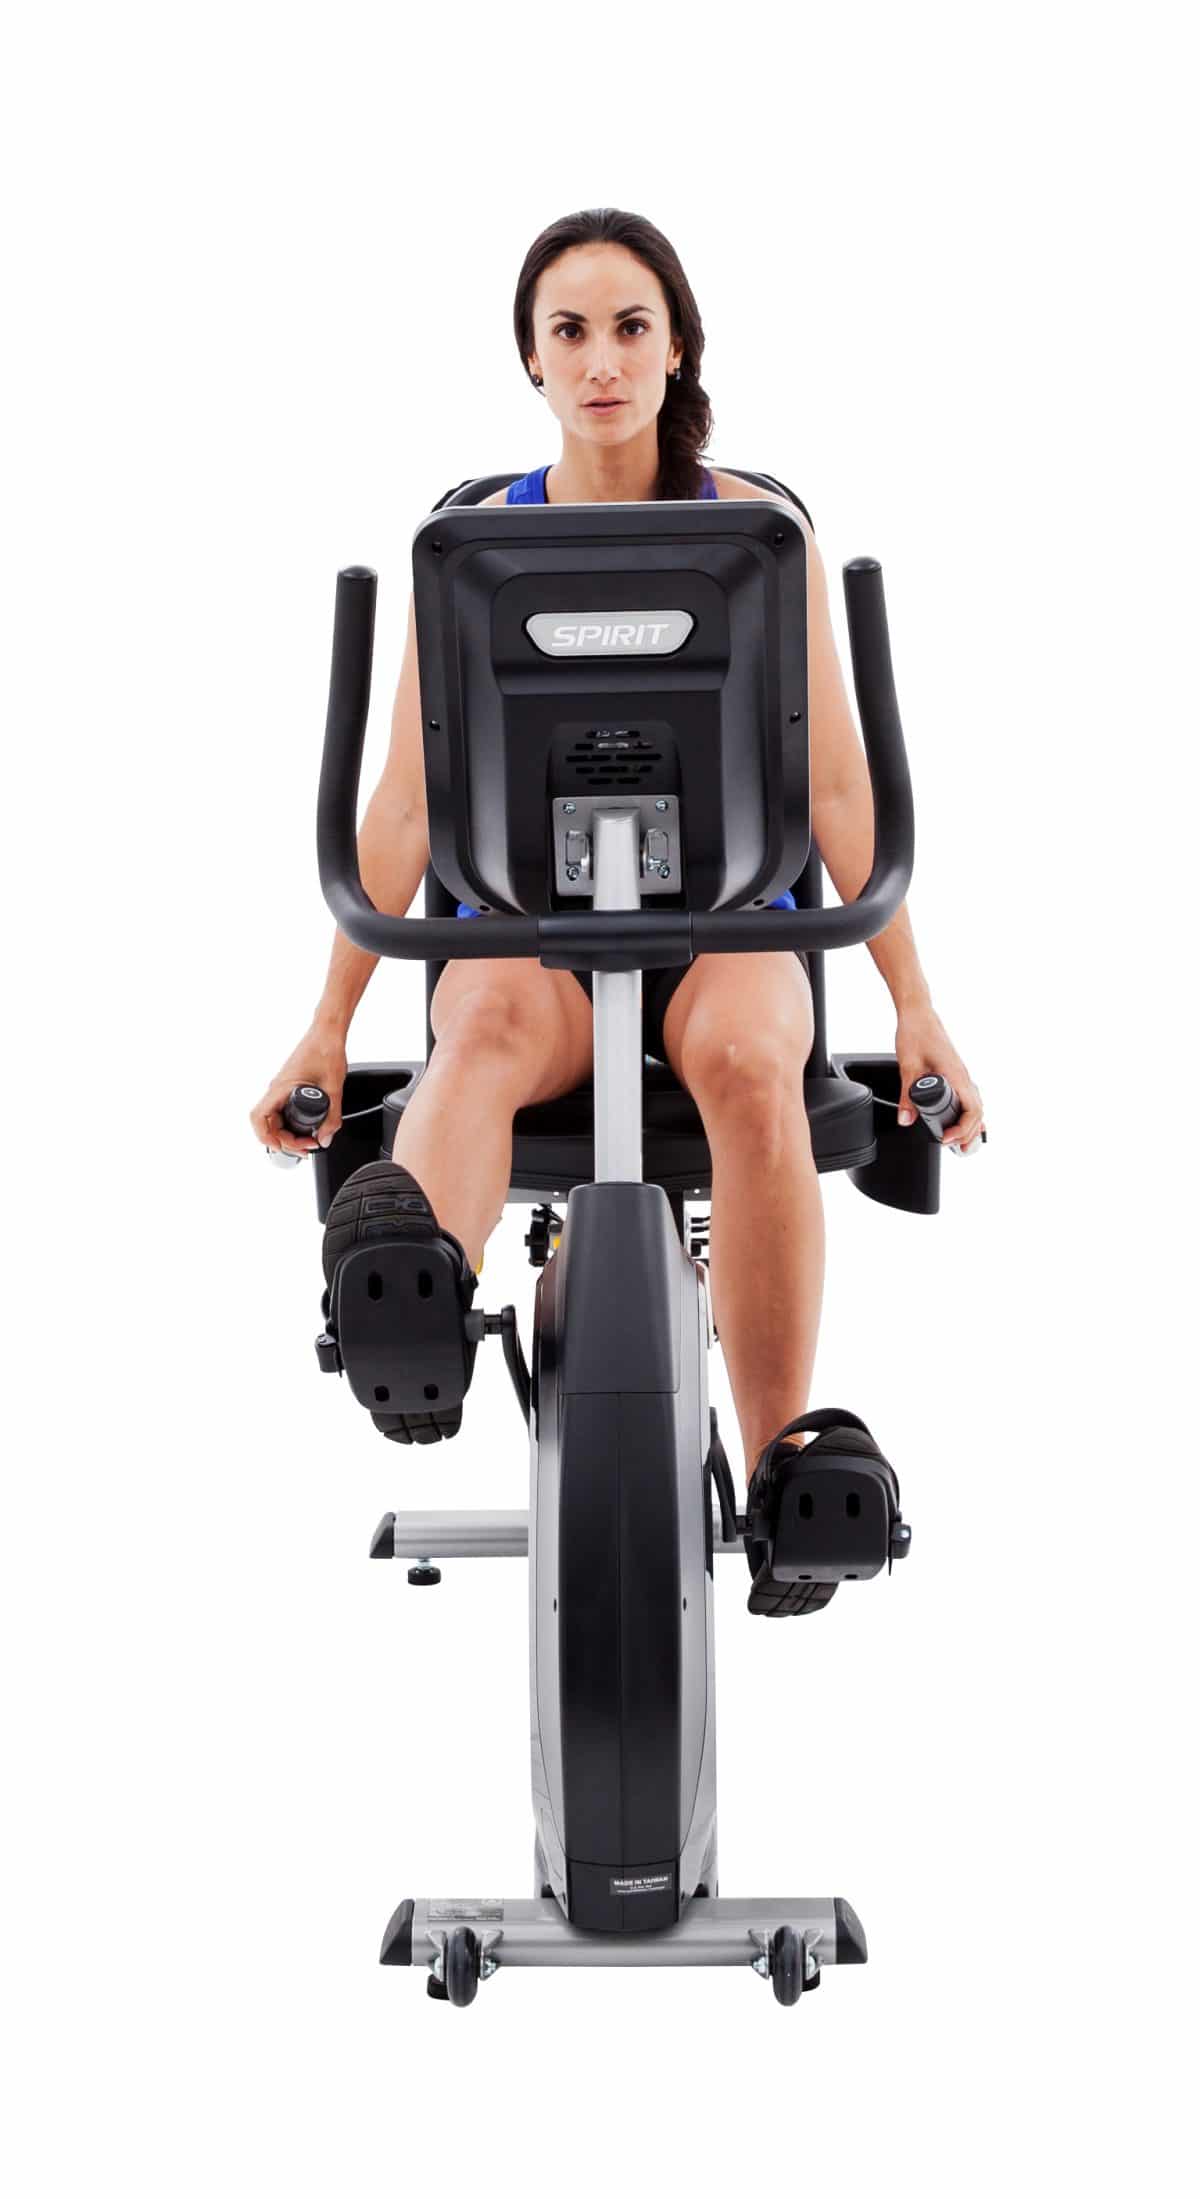 A woman riding an exercise bike on a white background.